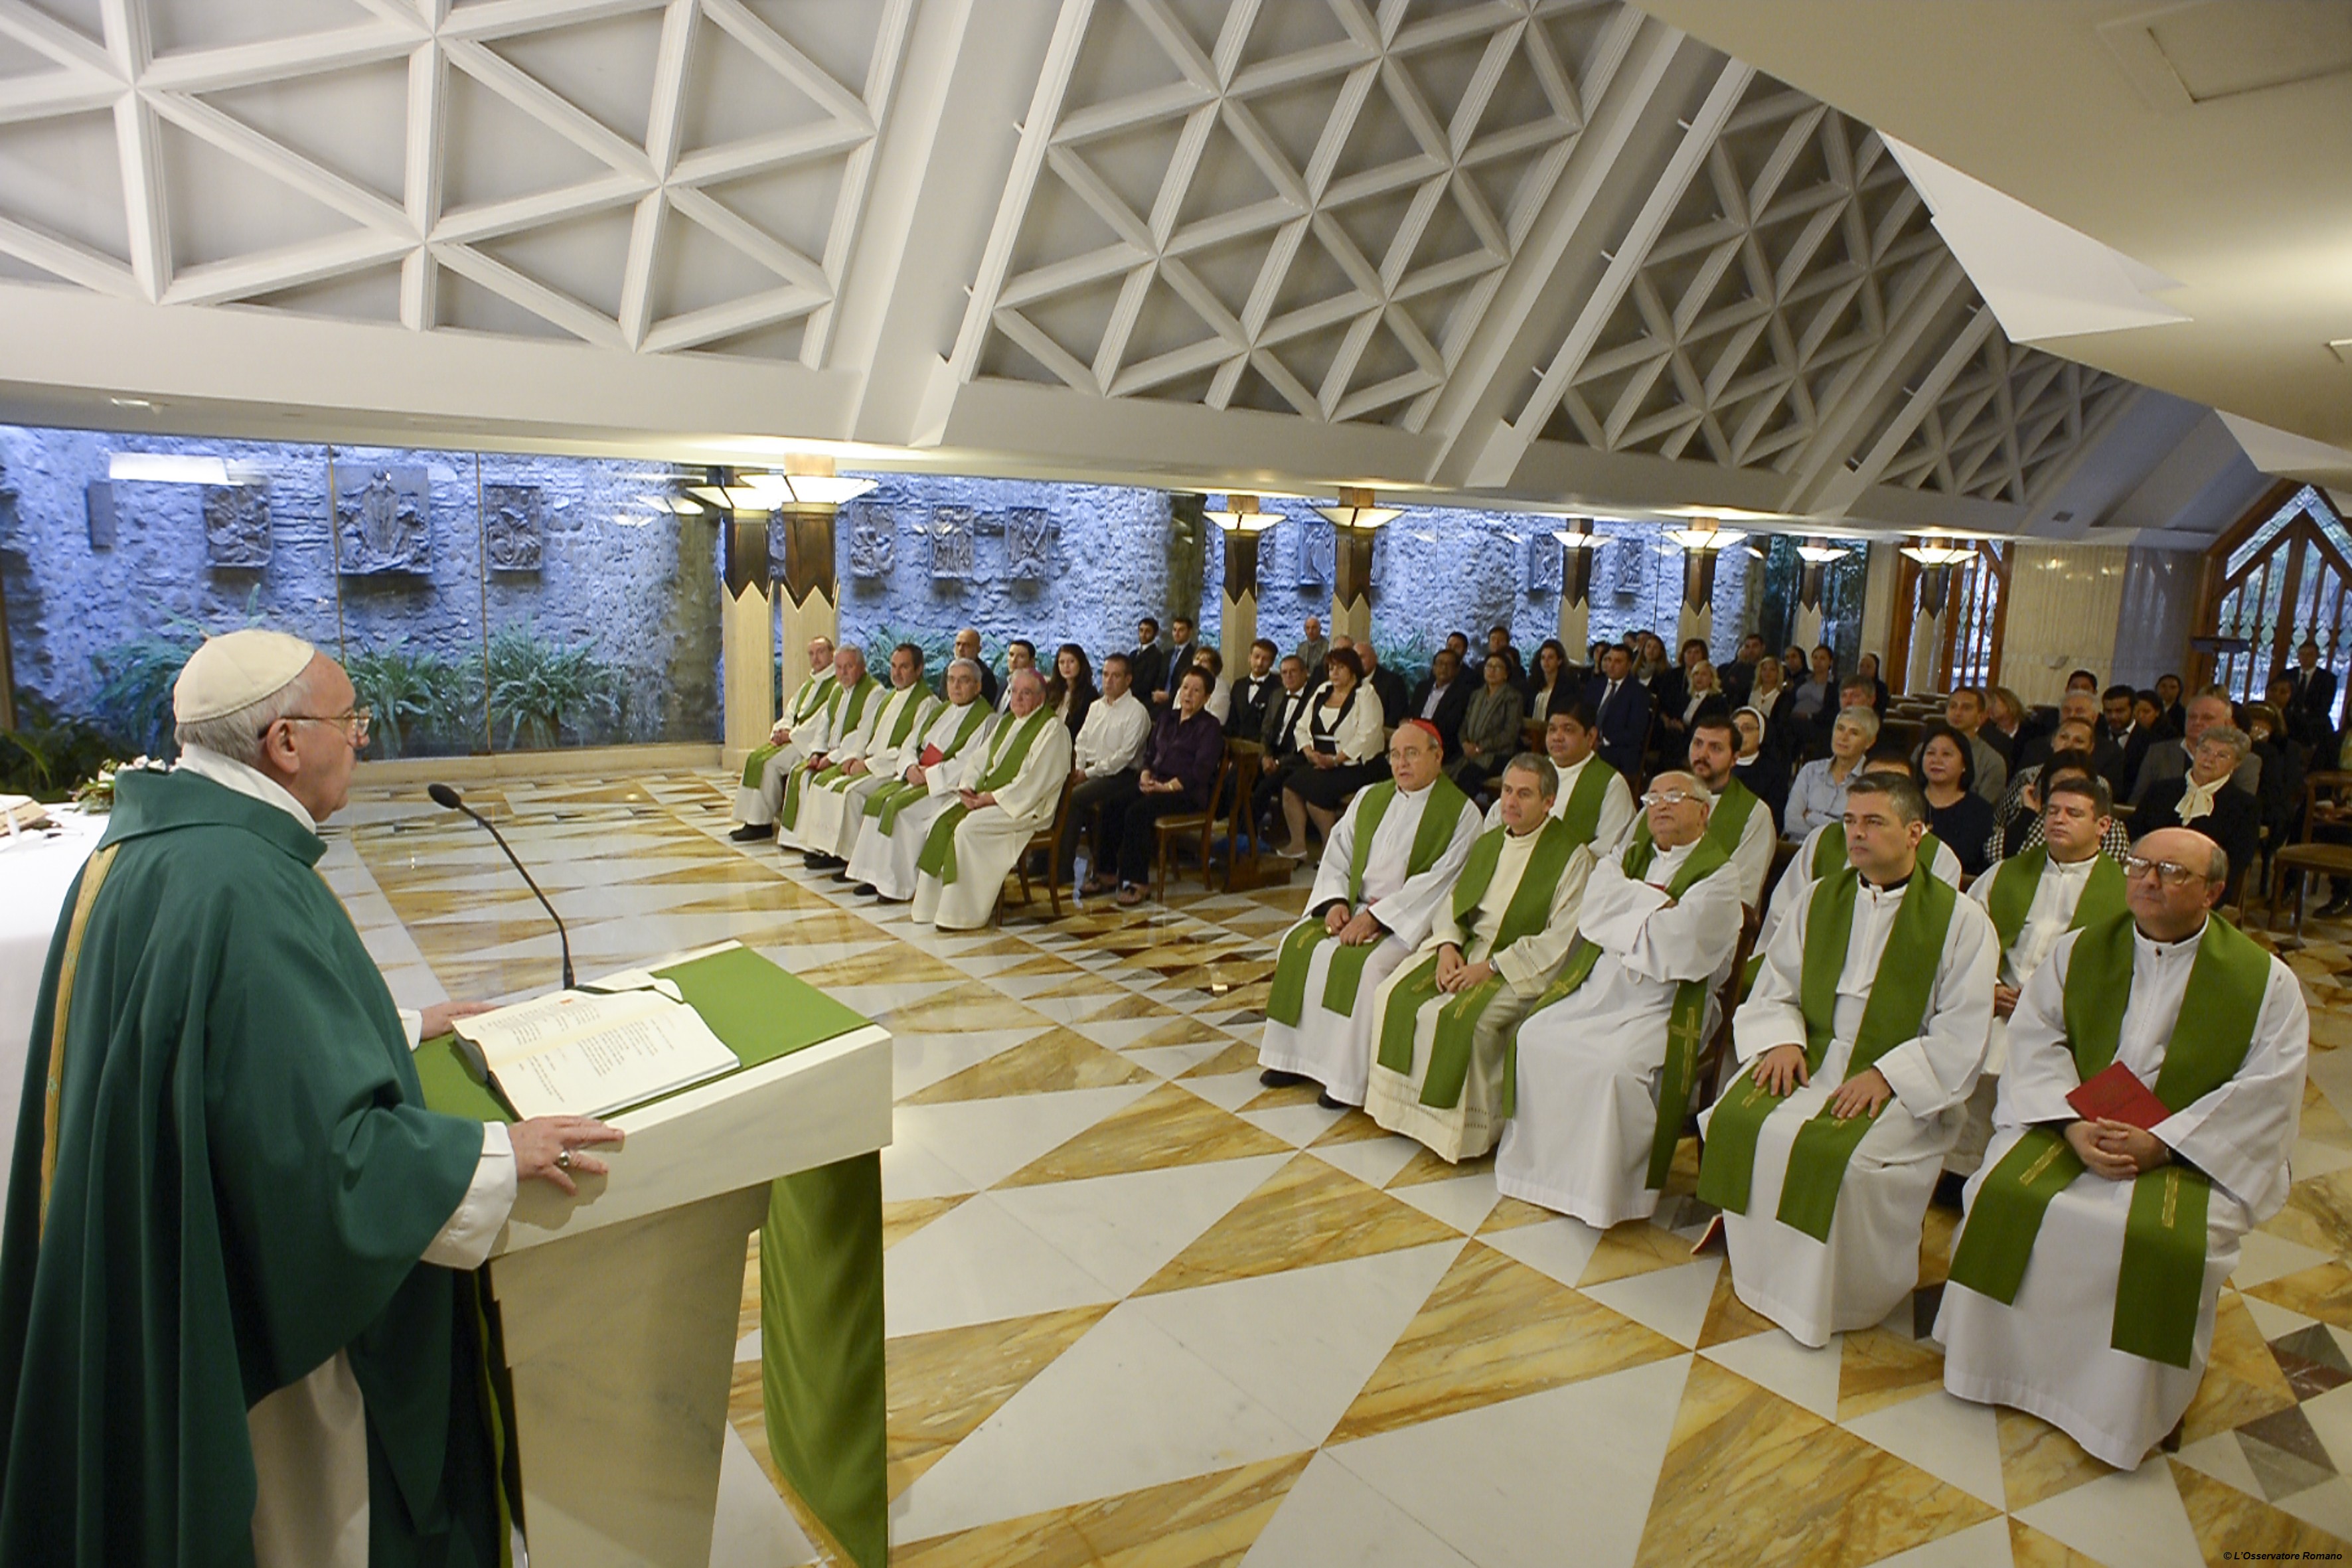 Pope Francis during today's Mass in Santa Marta